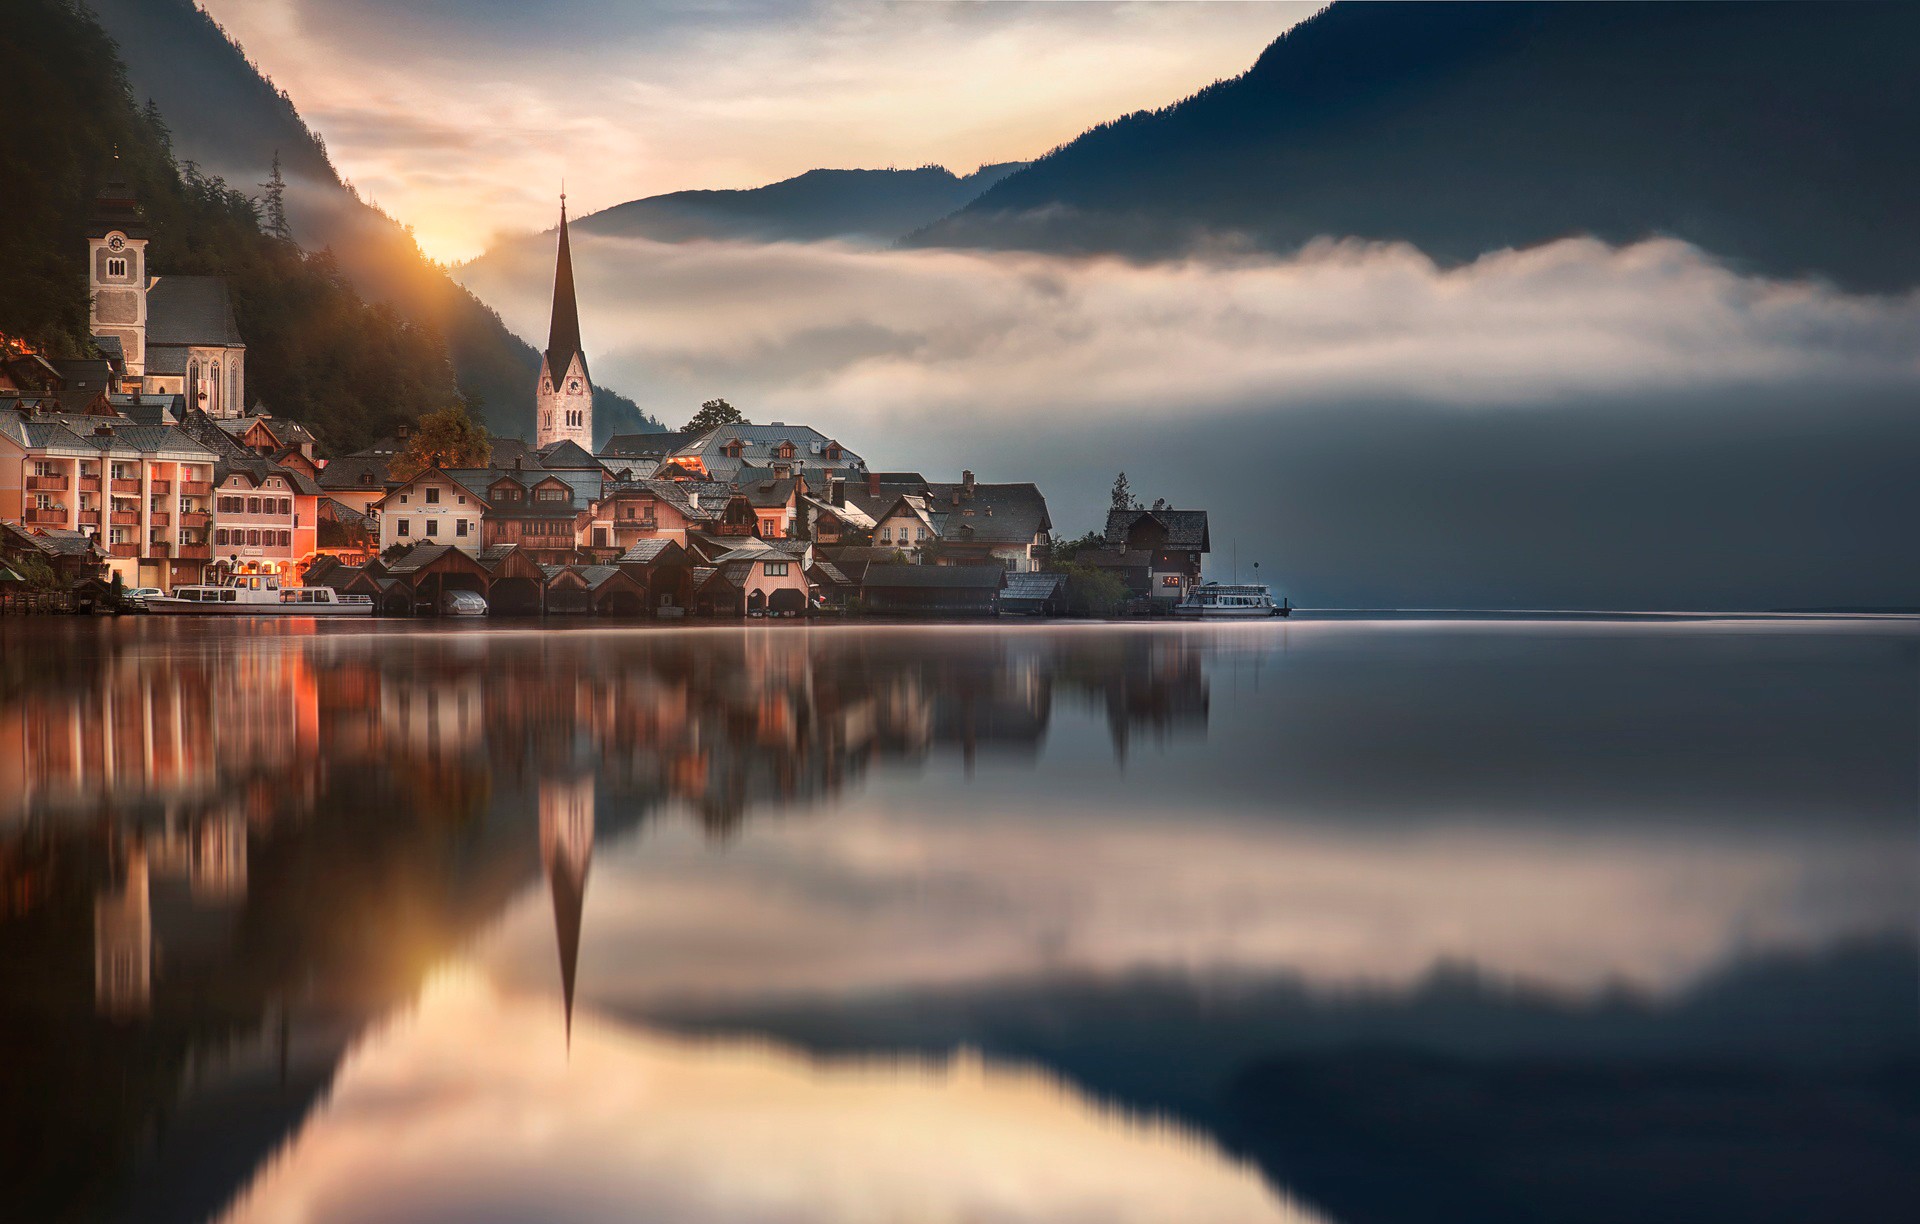 General 1920x1224 water clouds mountains photography landscape nature Market Town town lake reflection Austria Hallstatt